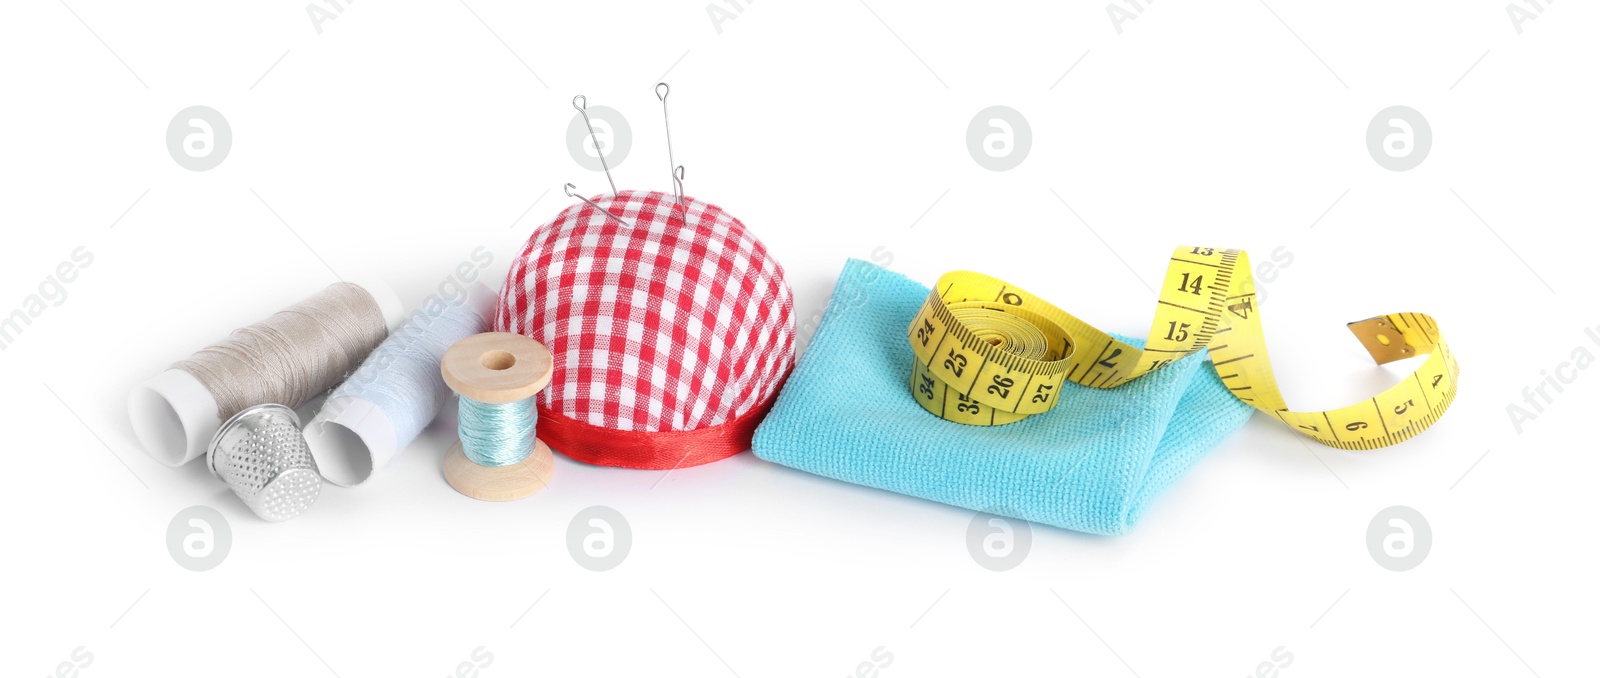 Photo of Pincushion, sewing needles, spools of threads, cloth, measuring tape and thimble isolated on white